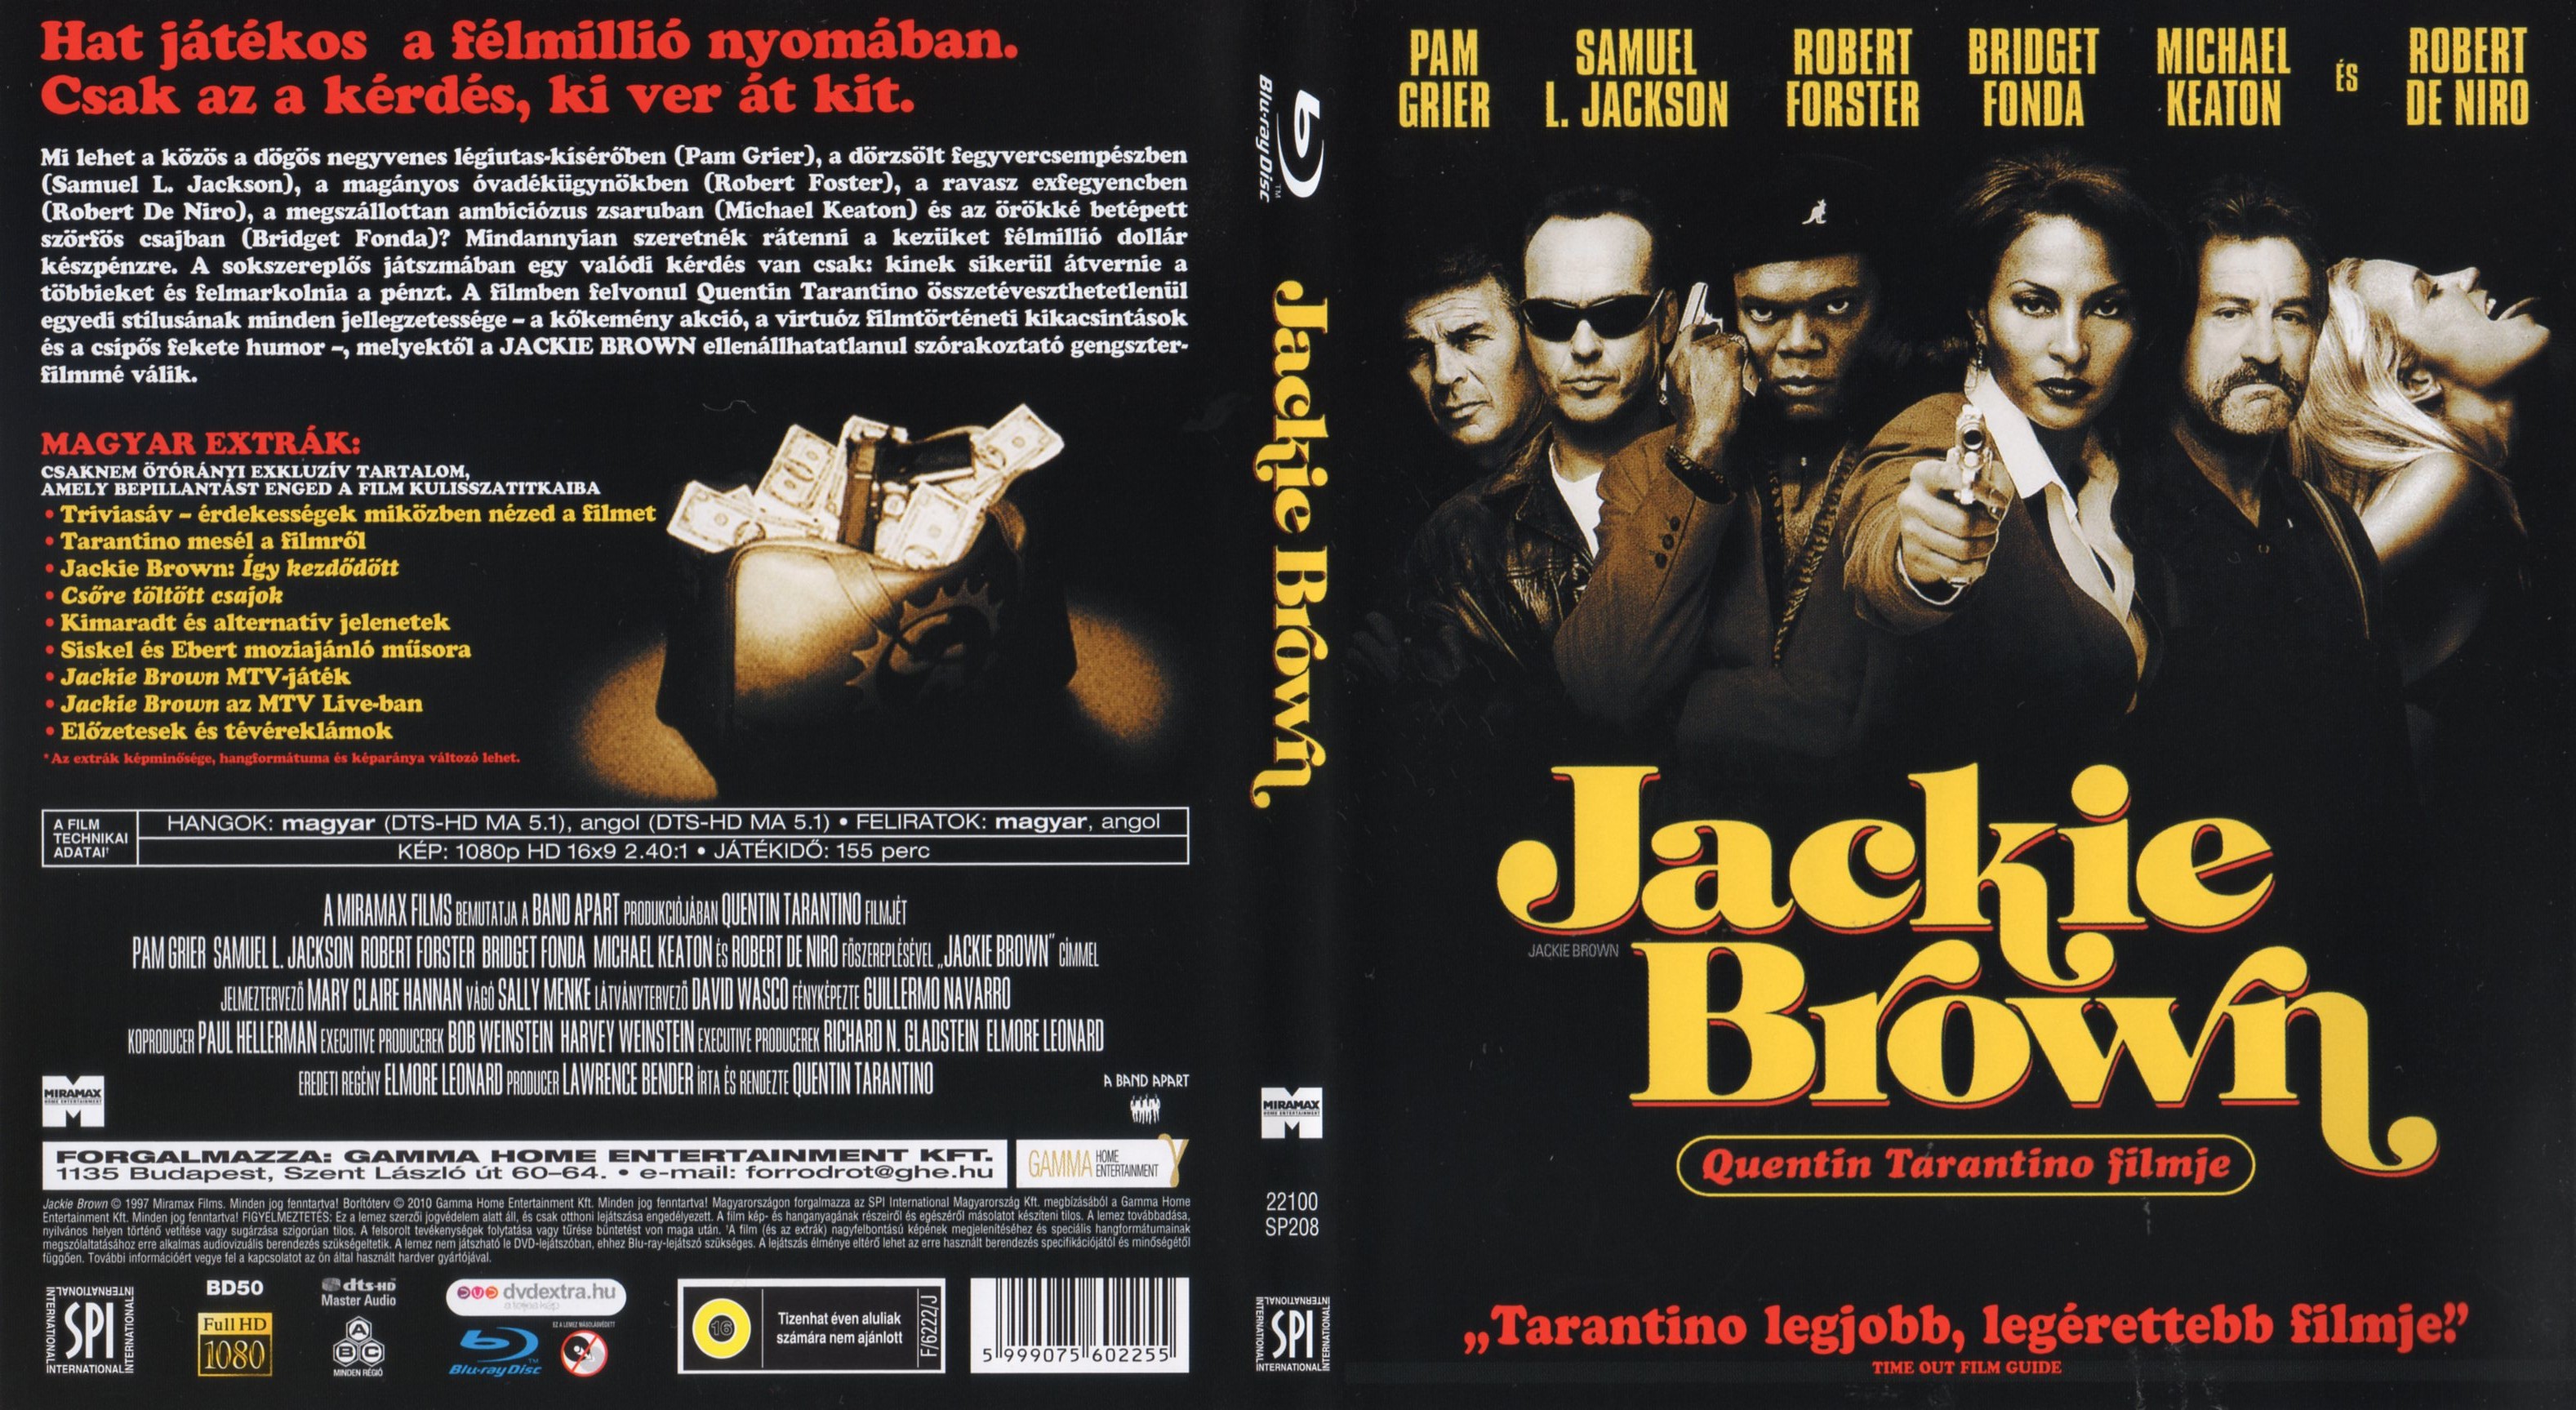 Jackie brown quentin tarantino soundtrack torrent brooklyn orthodox jewish community in mourning torrent